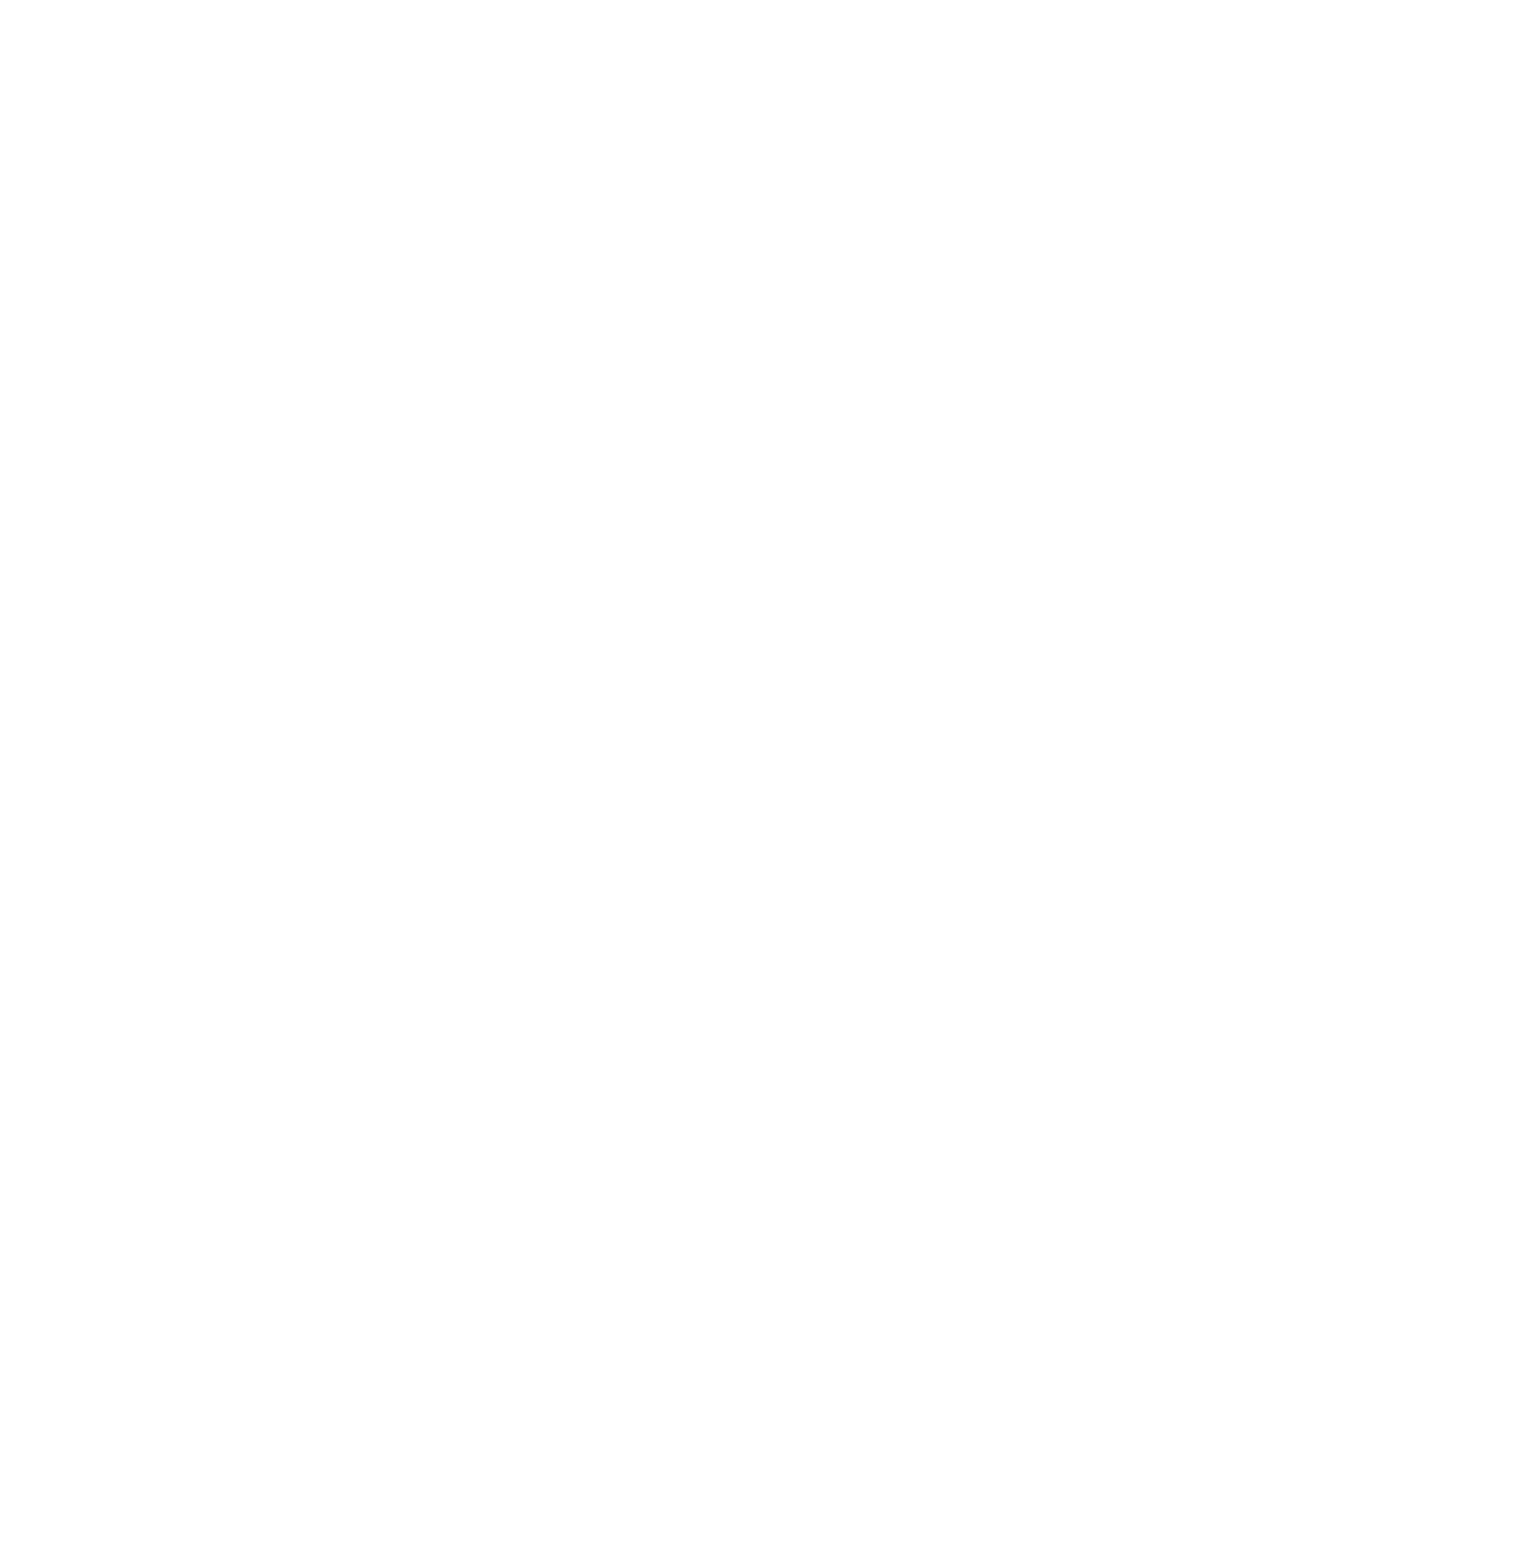 The Chefs' Warehouse logo for dark backgrounds (transparent PNG)